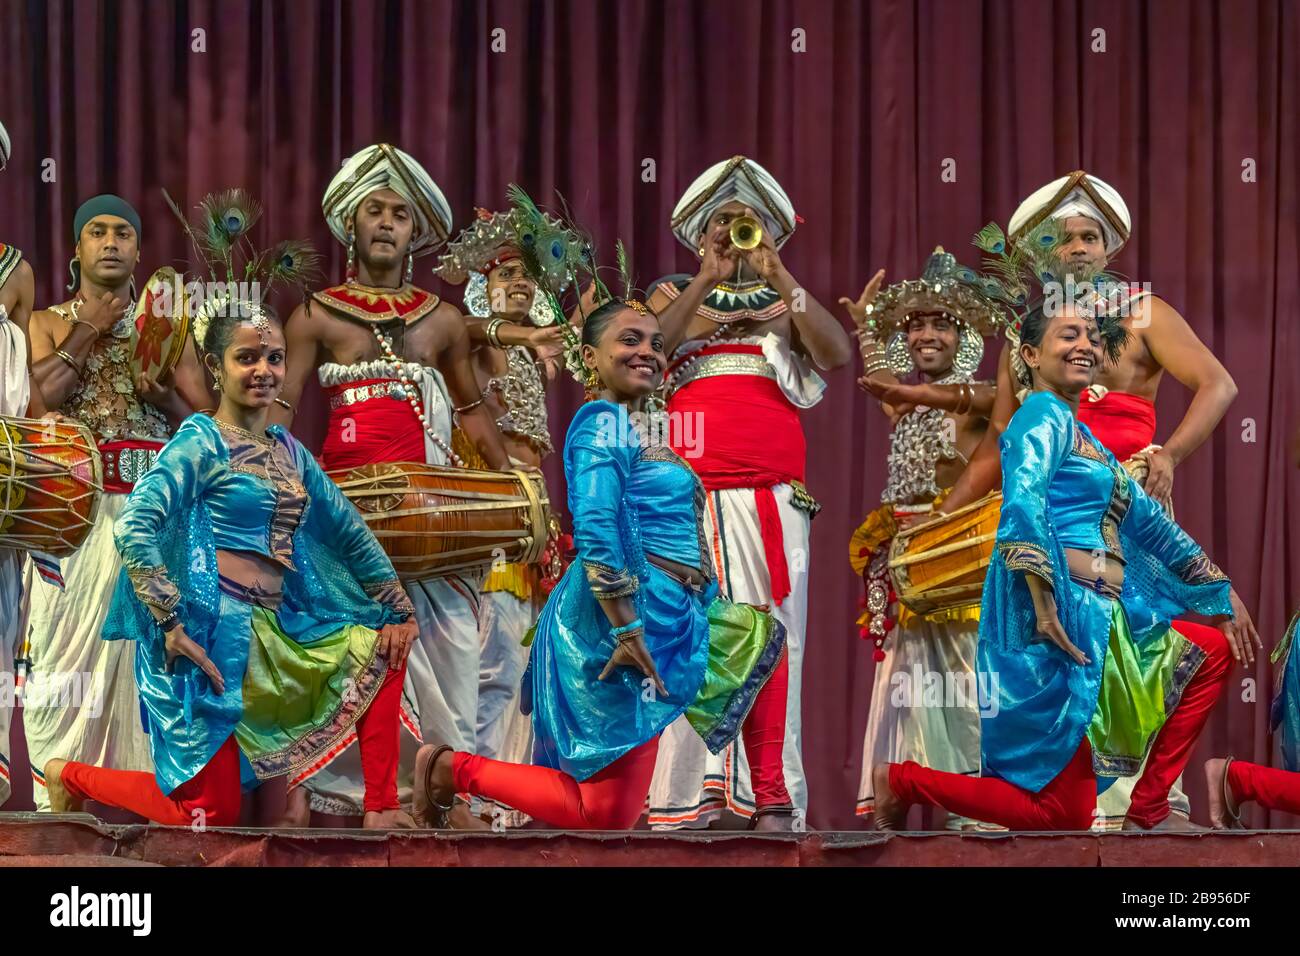 The famous Kandy Dancers in their  colourful traditional costumes during a performance in Kandy, Sri Lanka. Stock Photo